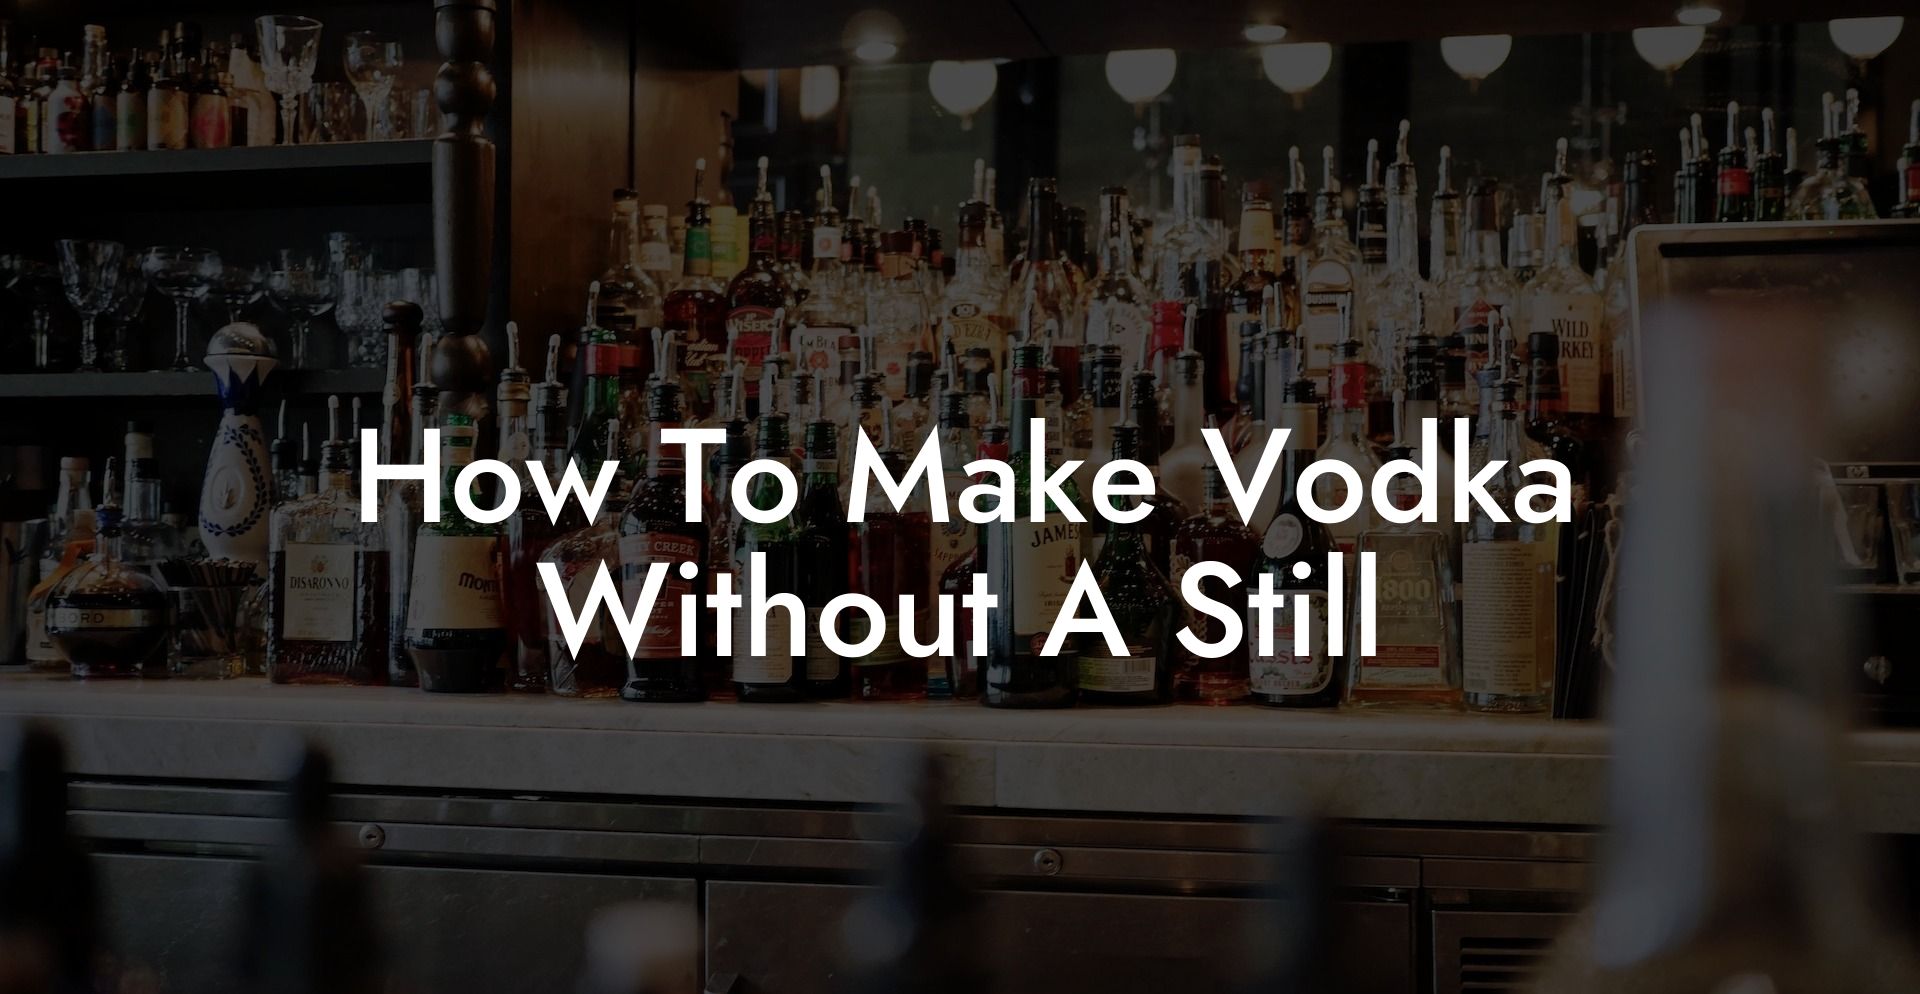 How To Make Vodka Without A Still